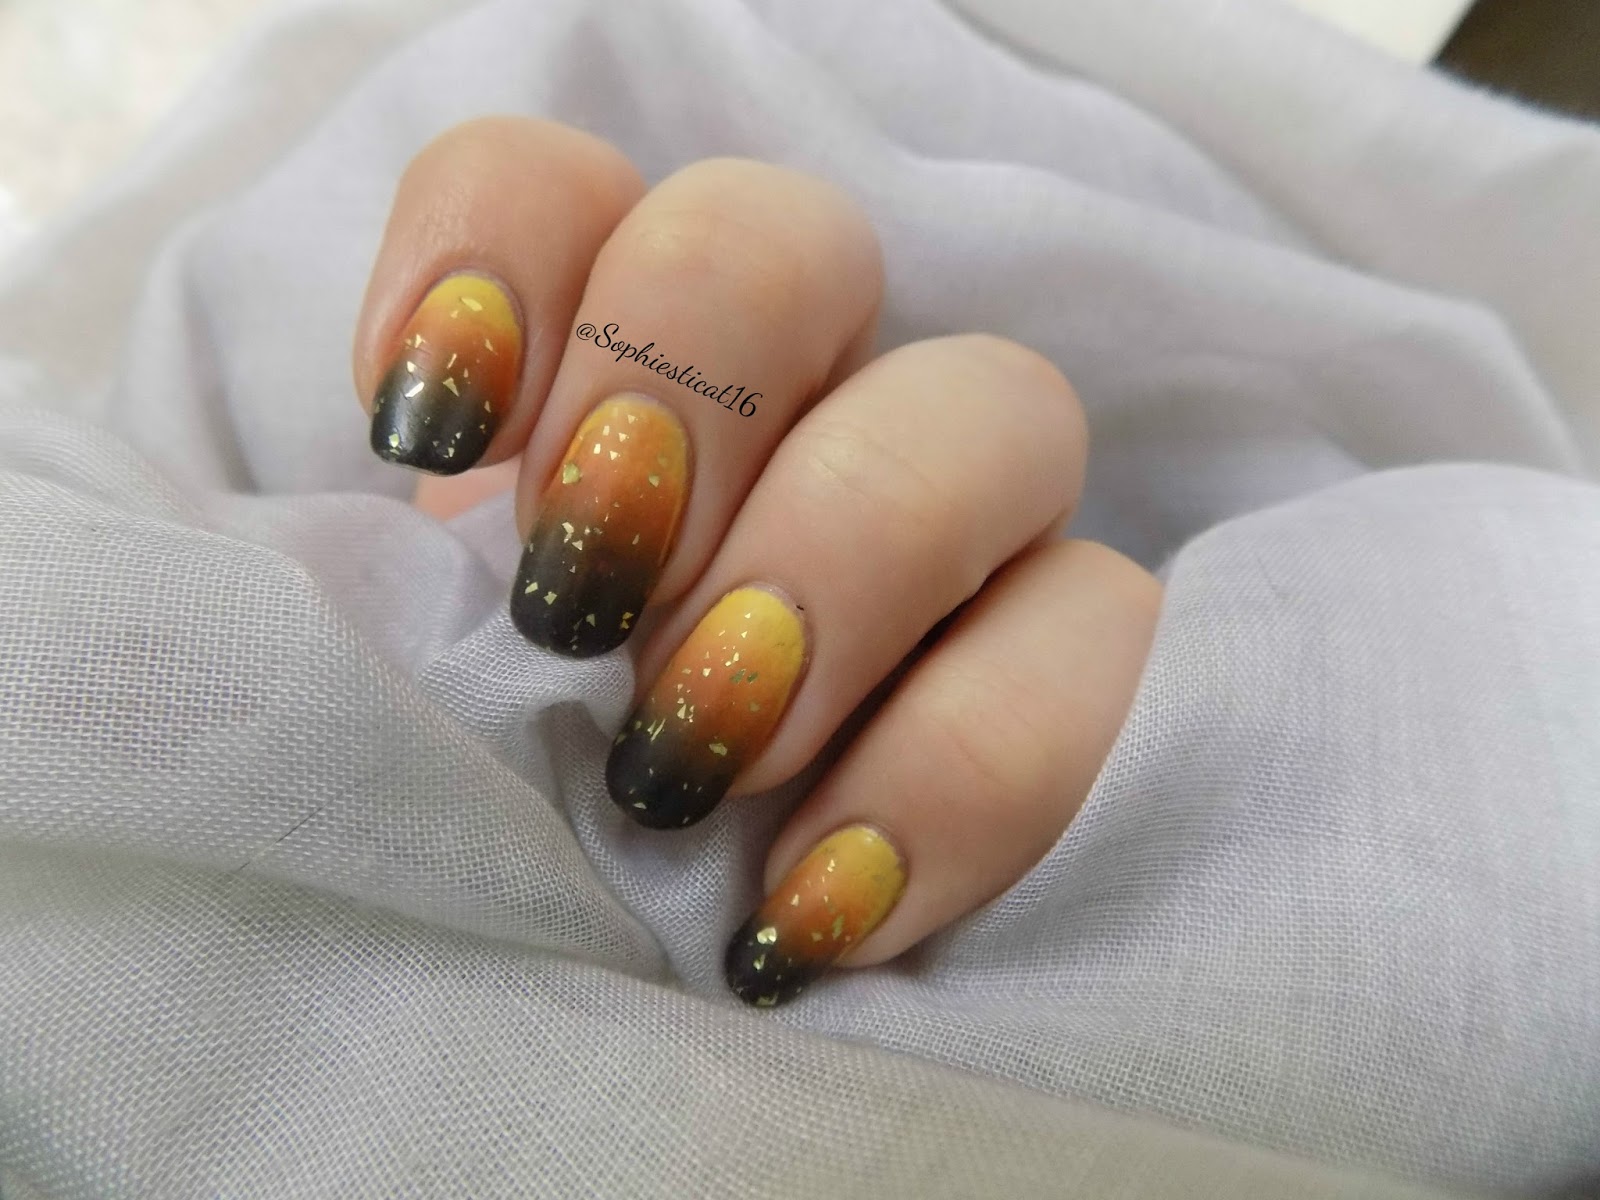 October Nail Designs with Christian Symbols - wide 9